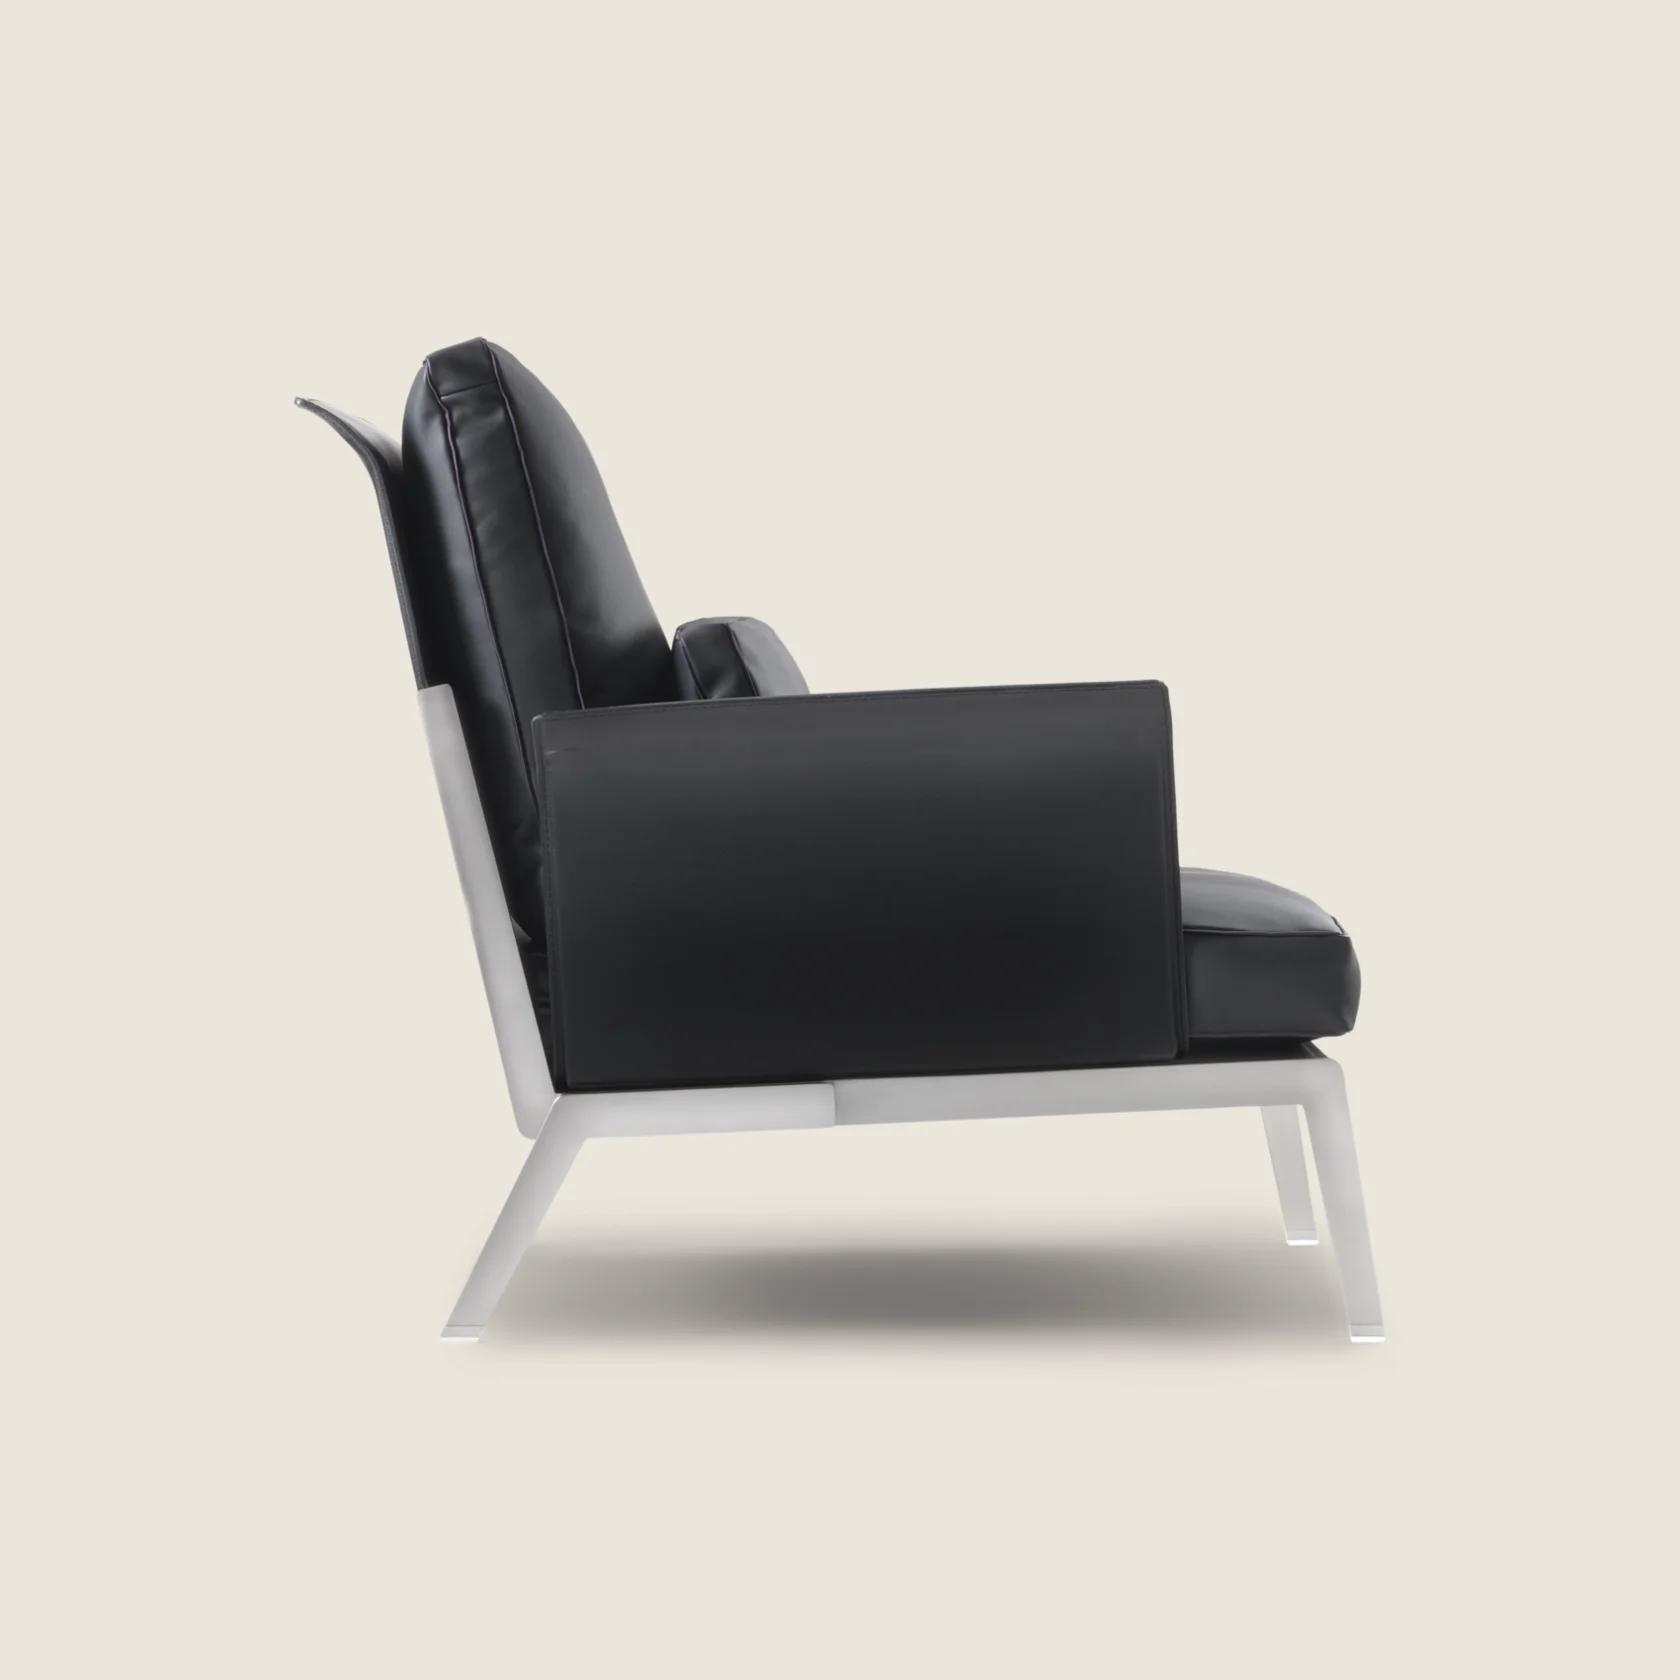 014B01_HAPPY HOUR_ARMCHAIR_01.png